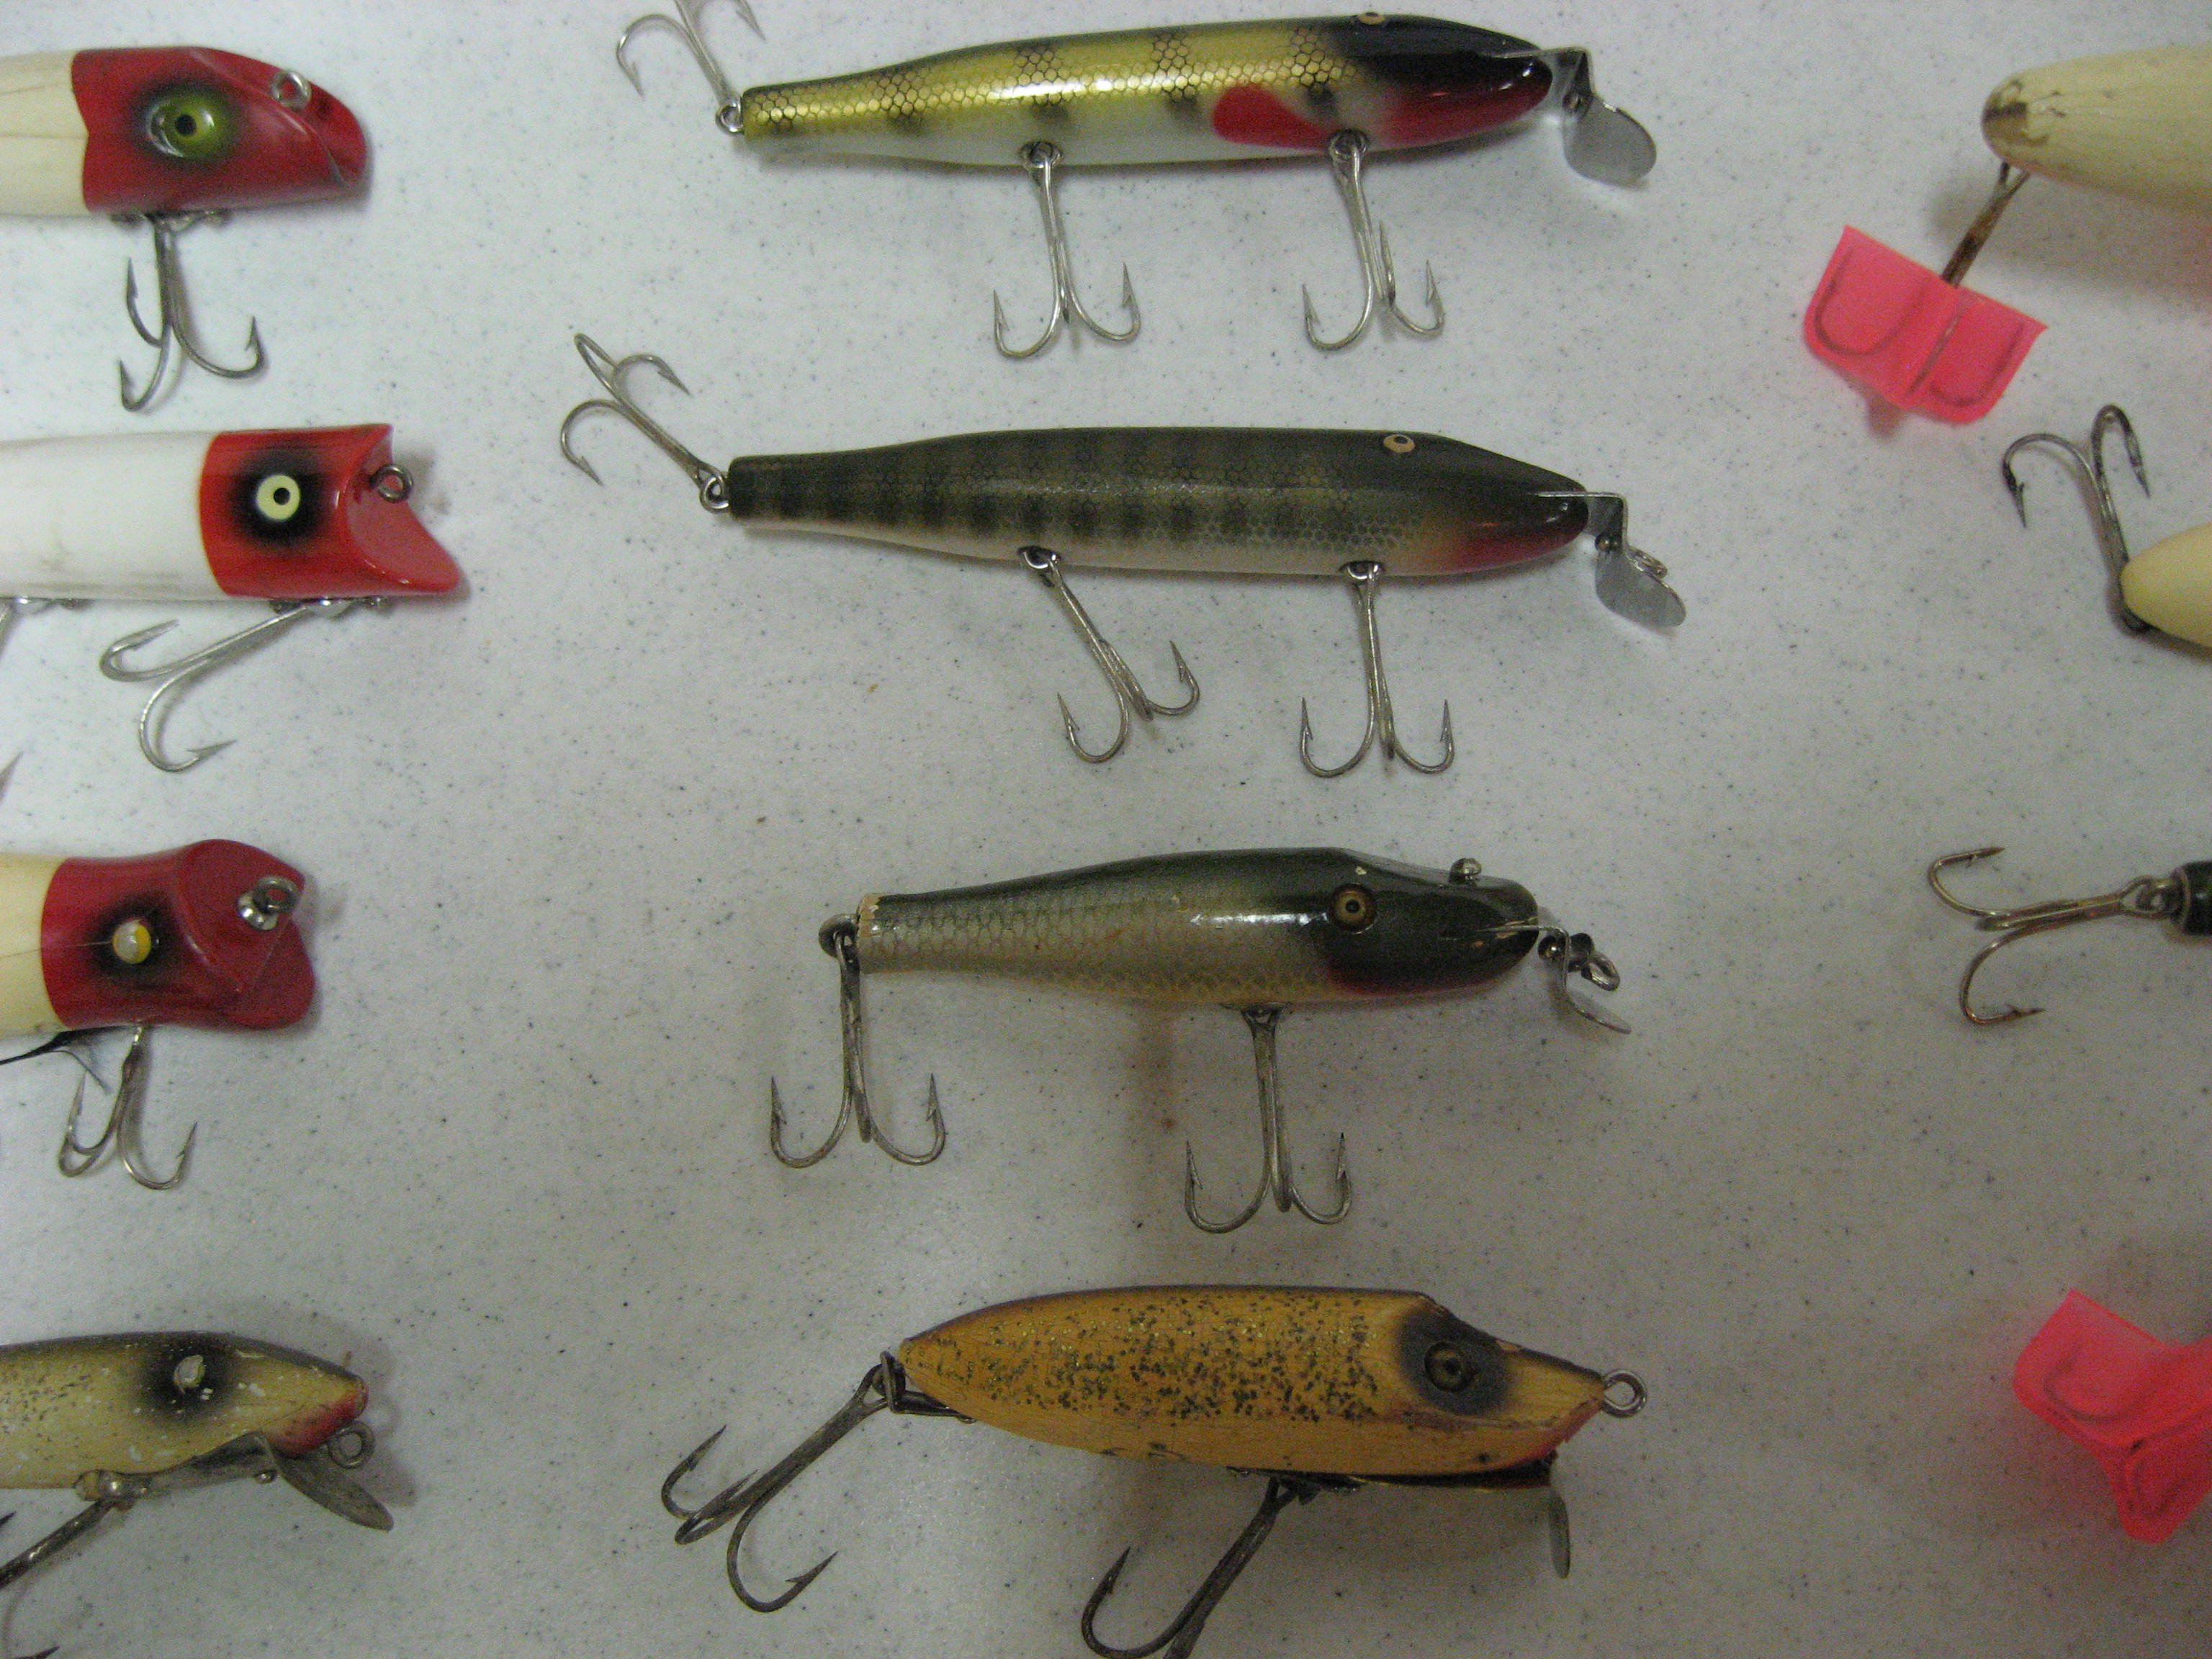 Old Lures - General Discussion Forum - General Discussion Forum